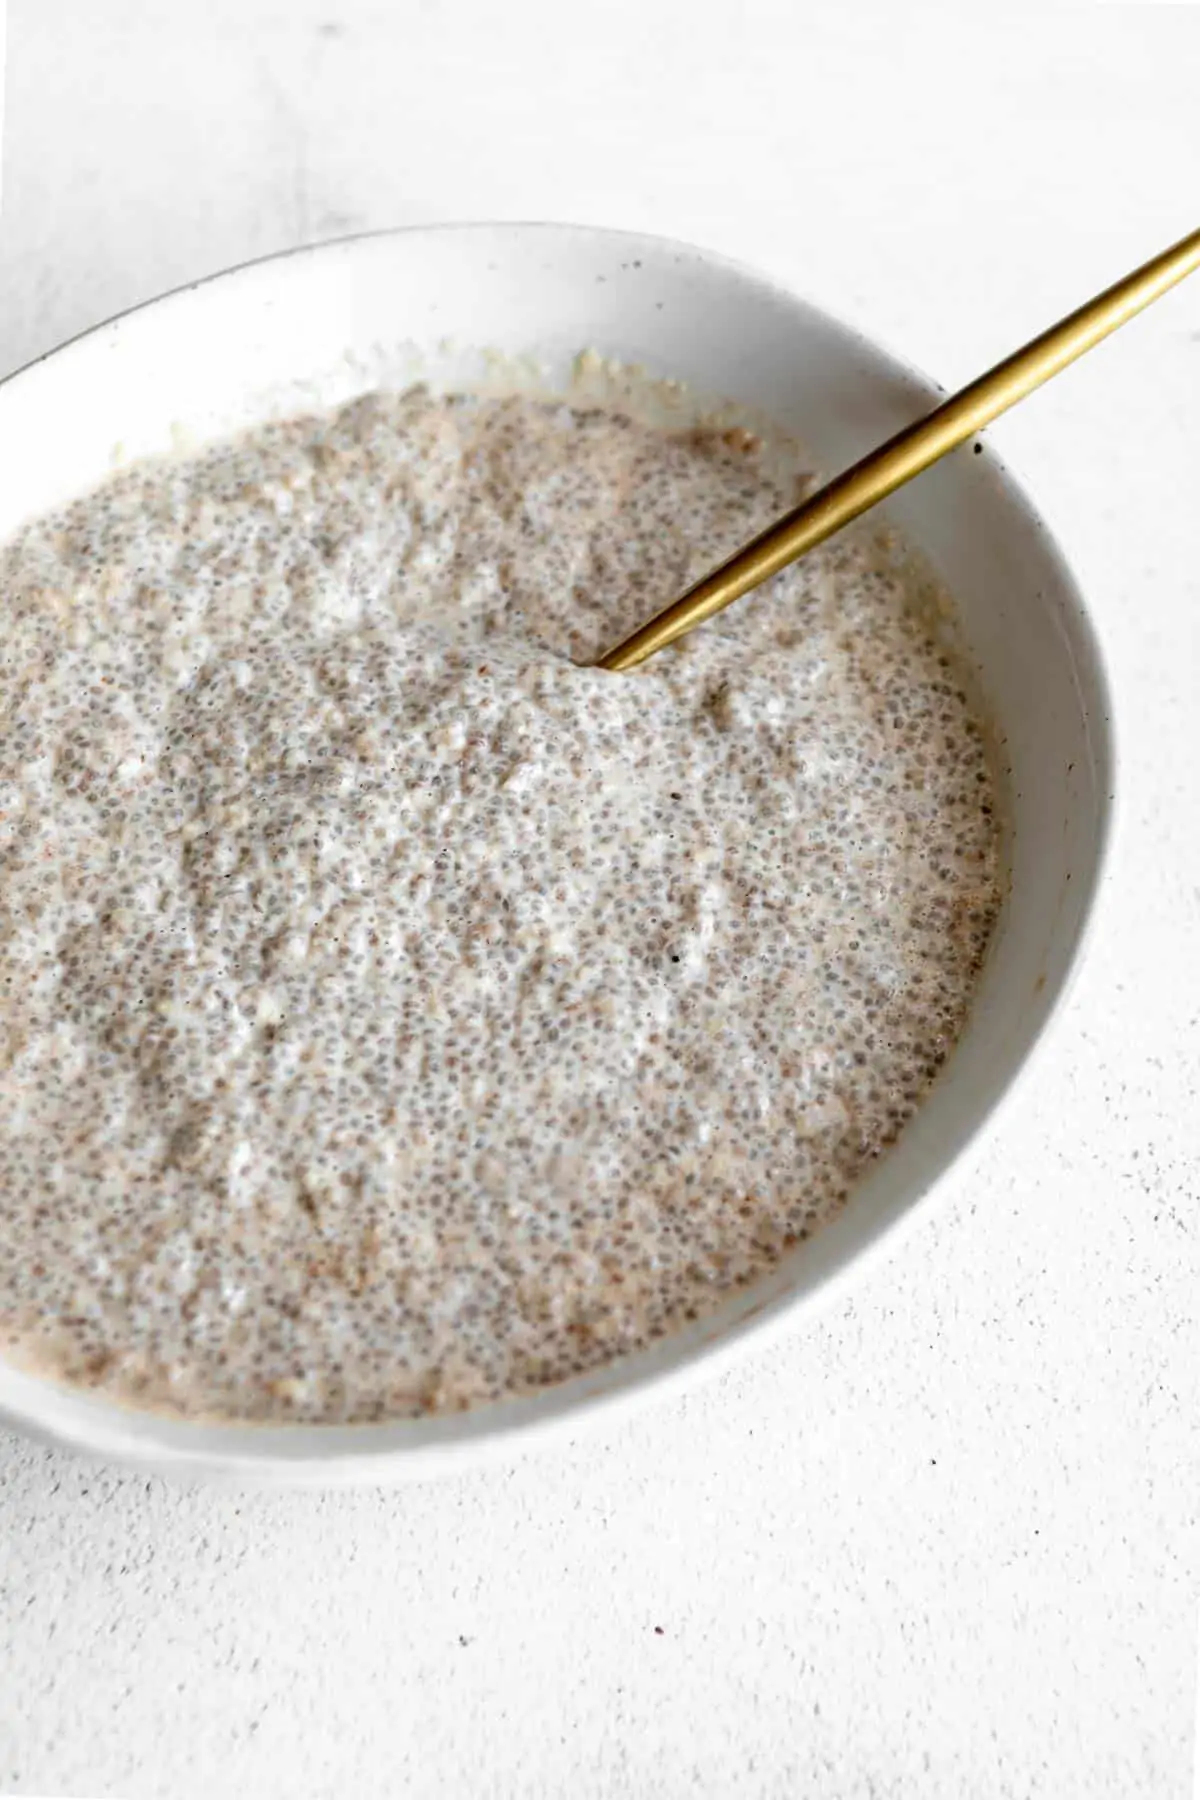 chia seed pudding in a bowl with a gold spoon